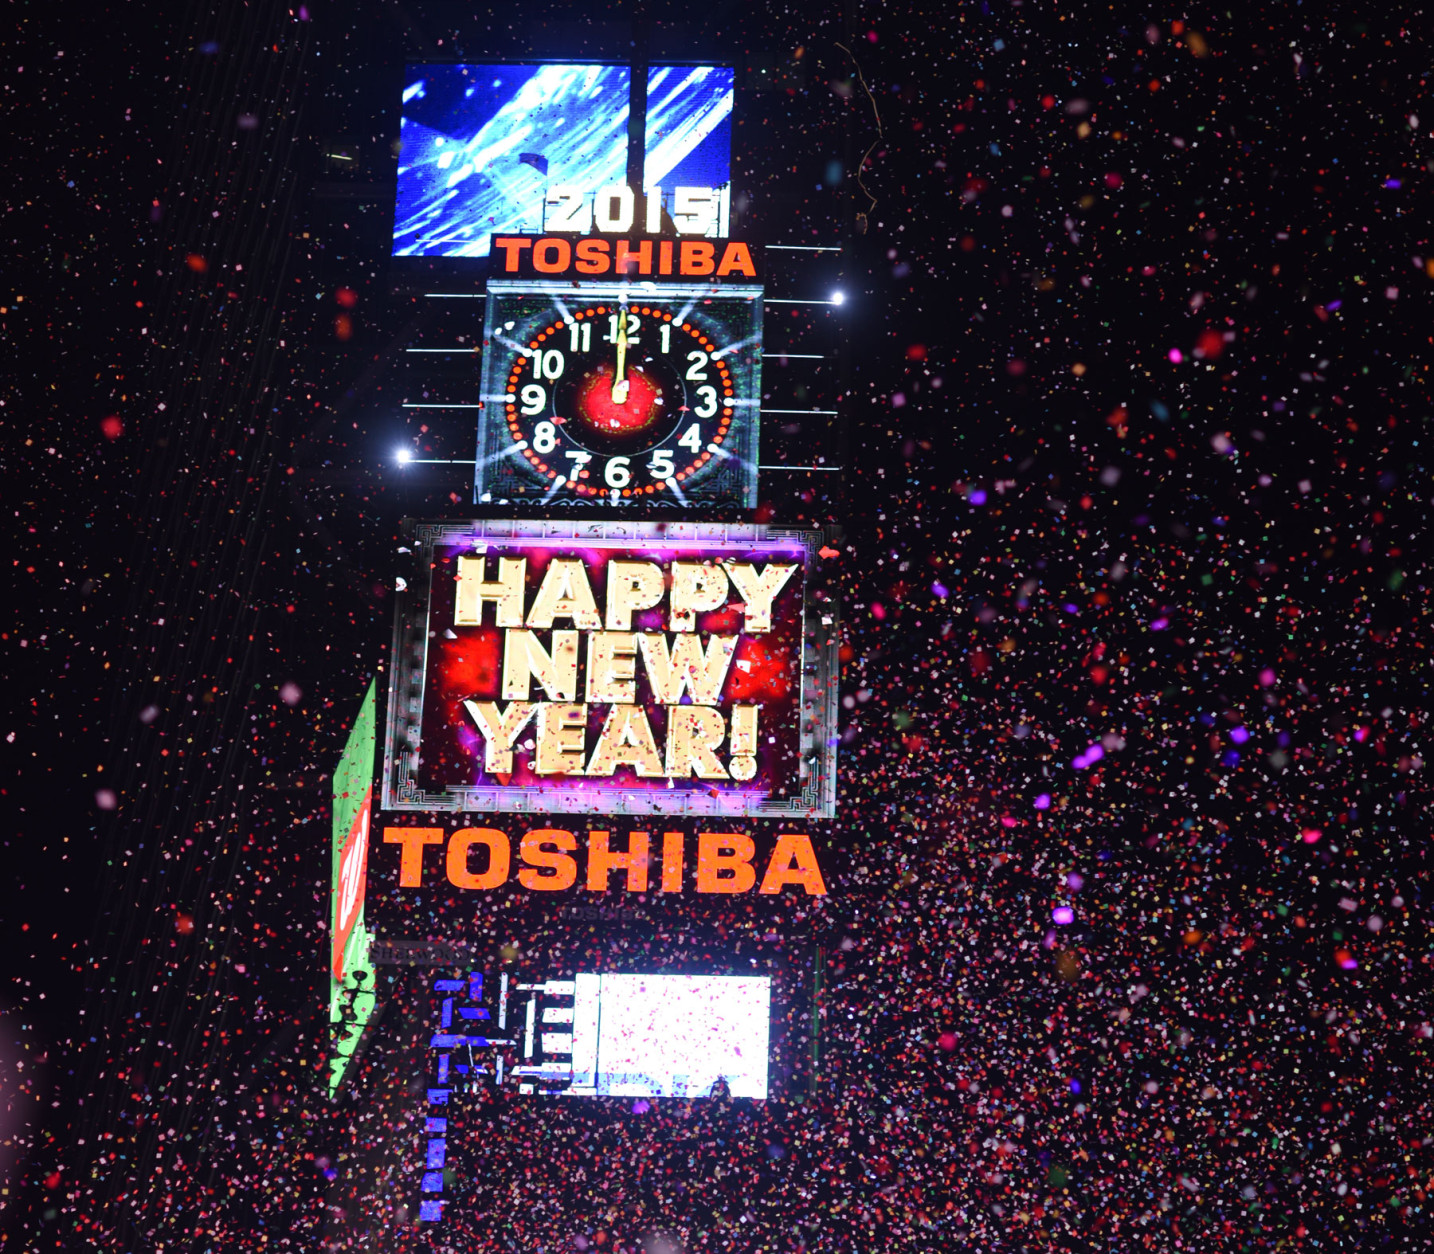 People cheer as the ball drops at midnight in Times Square on January 1, 2015 in New York City. An estimated one million people from around the world are expected to pack Times Square to ring in 2015. (Photo by Andrew Theodorakis/Getty Images)